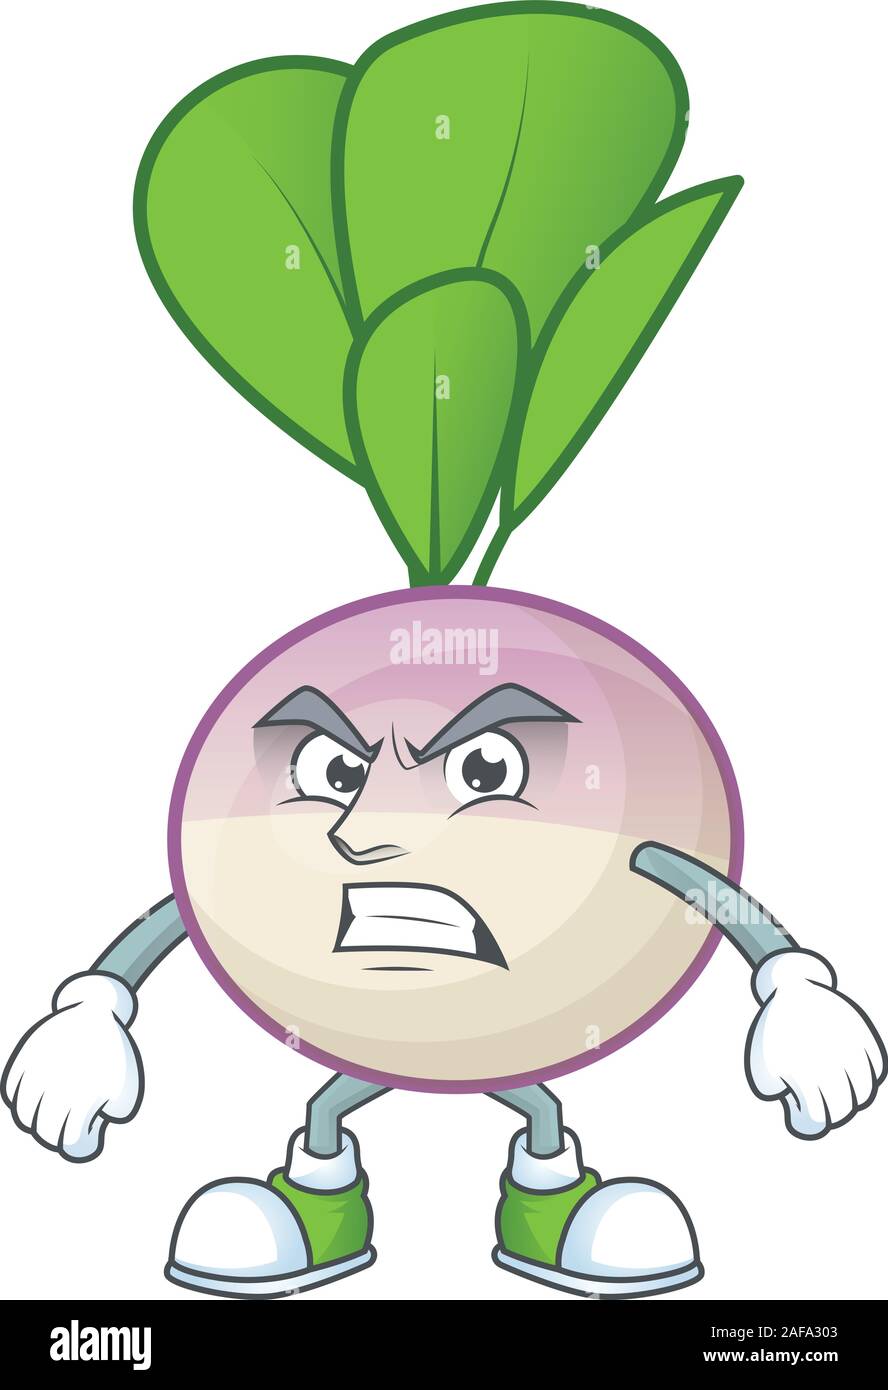 Picture of turnip cartoon character with angry face Stock Vector